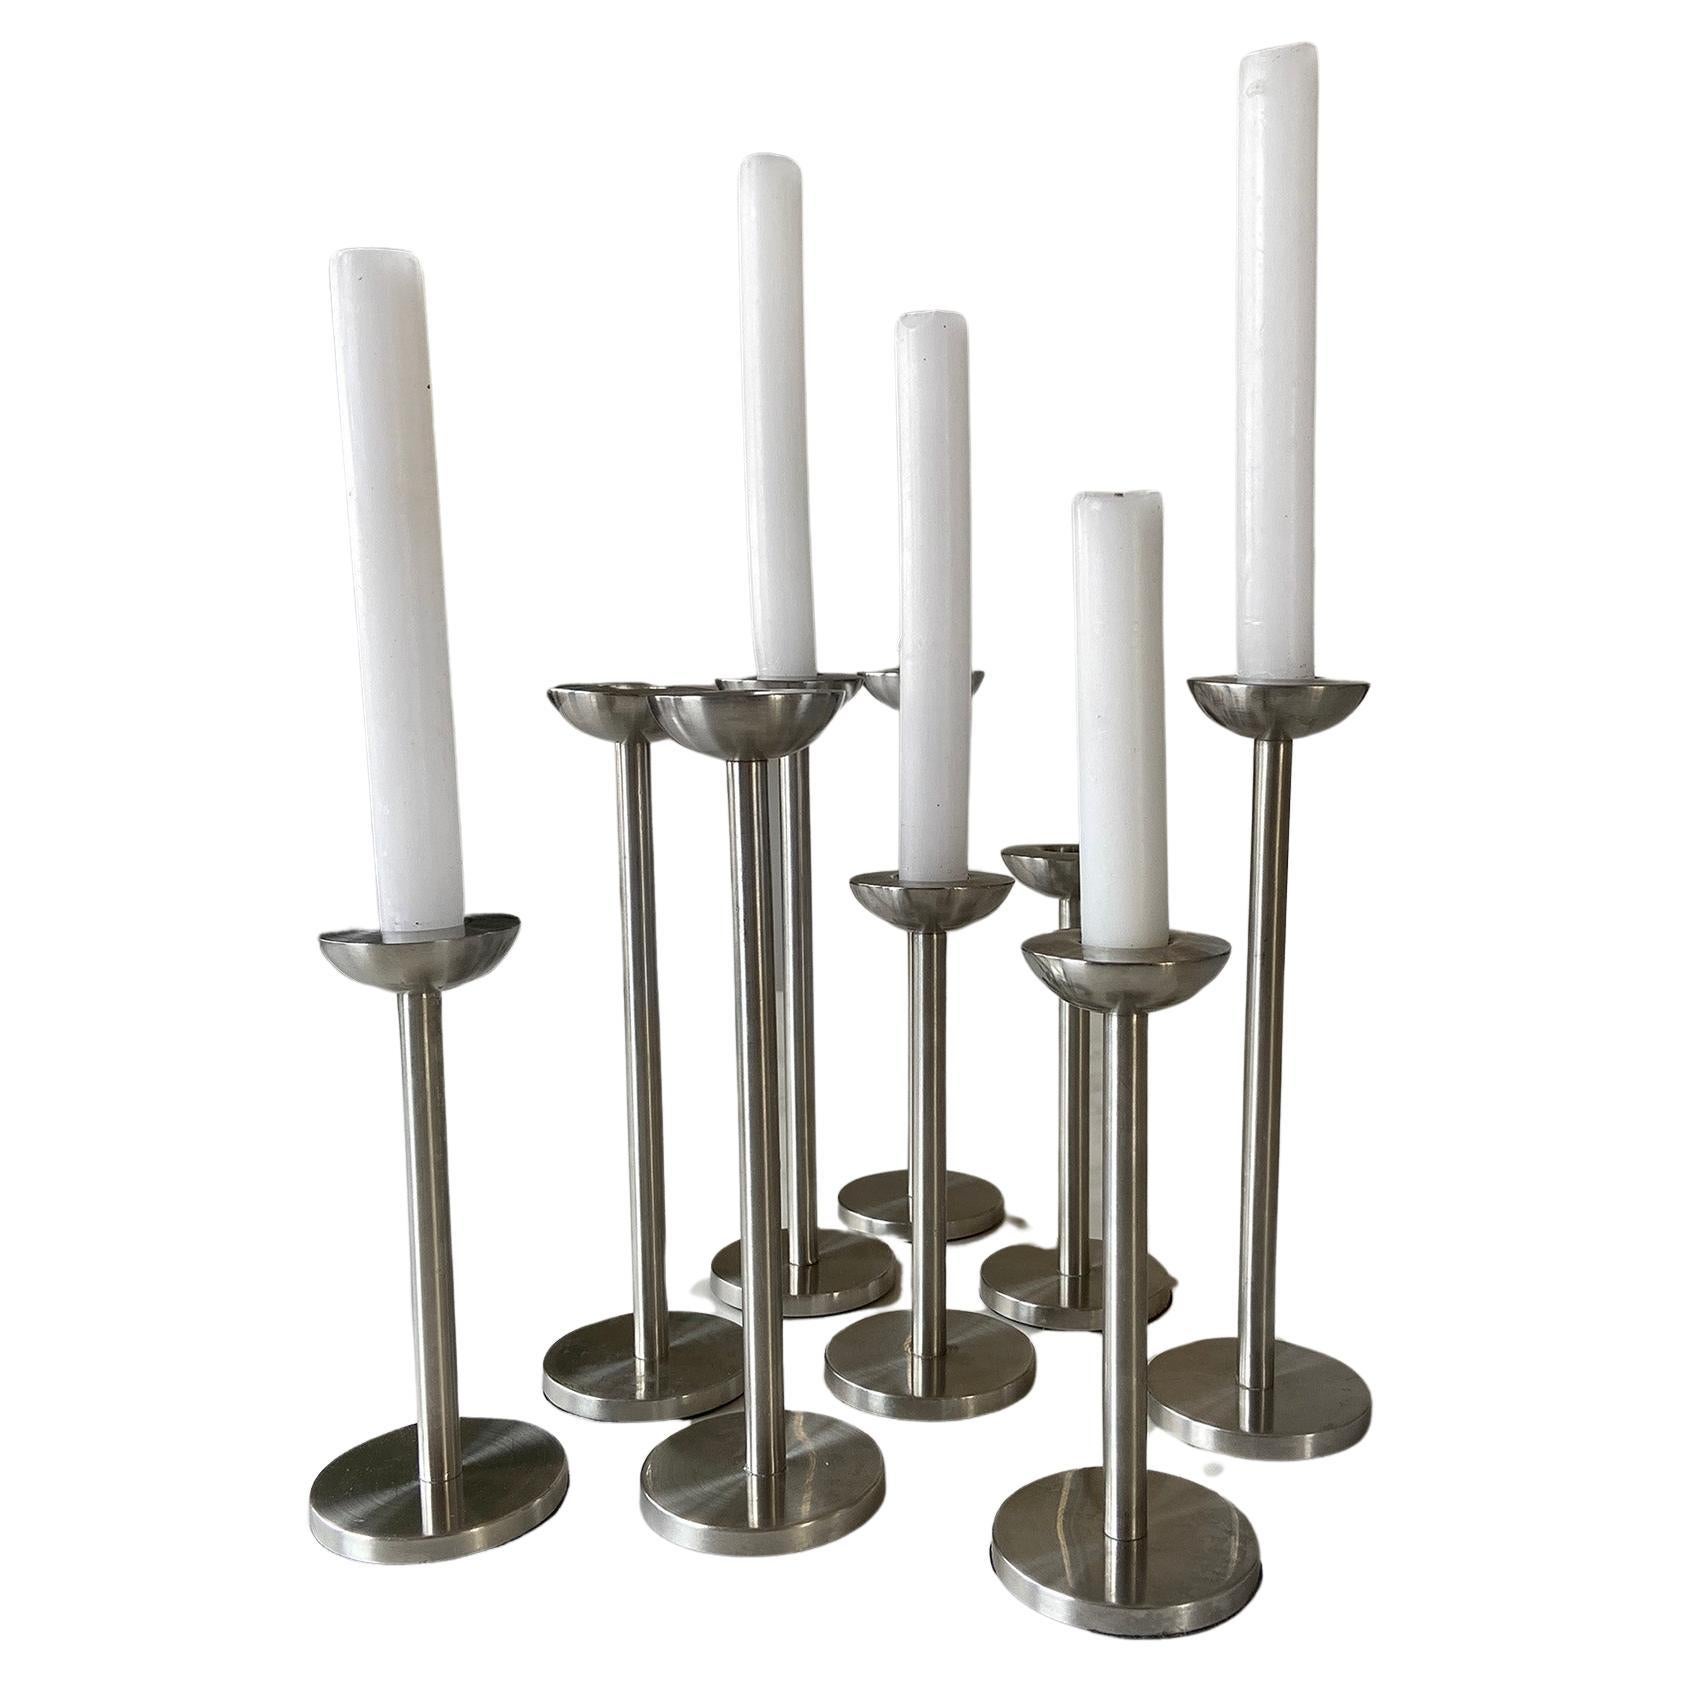 Elevate your home decor with our exclusive Stainless Steel Candle holder set, crafted in Germany this set of 9 embodies the iconic design styles of the 80s and 90s. Each piece is handmade and welded from mat stainless steel, which is a material that